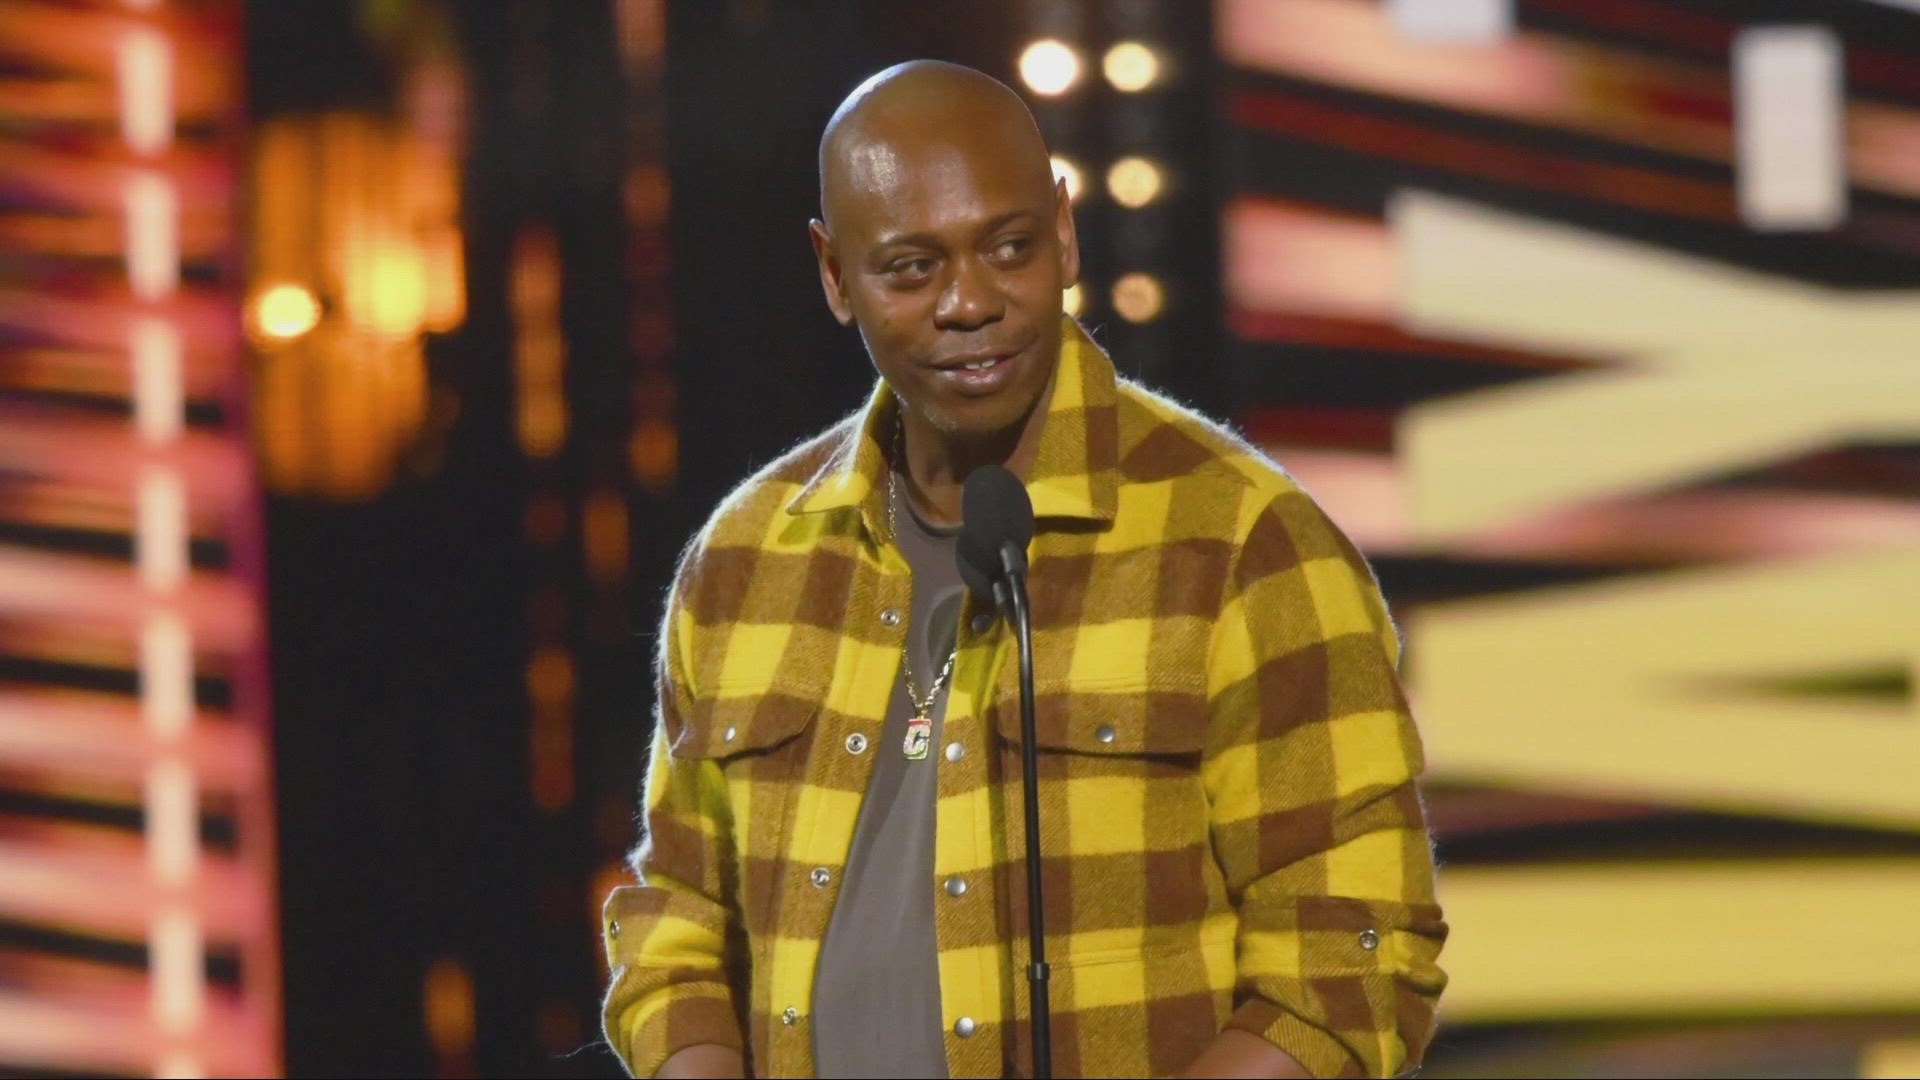 Comedian Dave Chapelle is speaking out after being attacked at the Netflix Is A Joke festival in Los Angeles on Tuesday night.